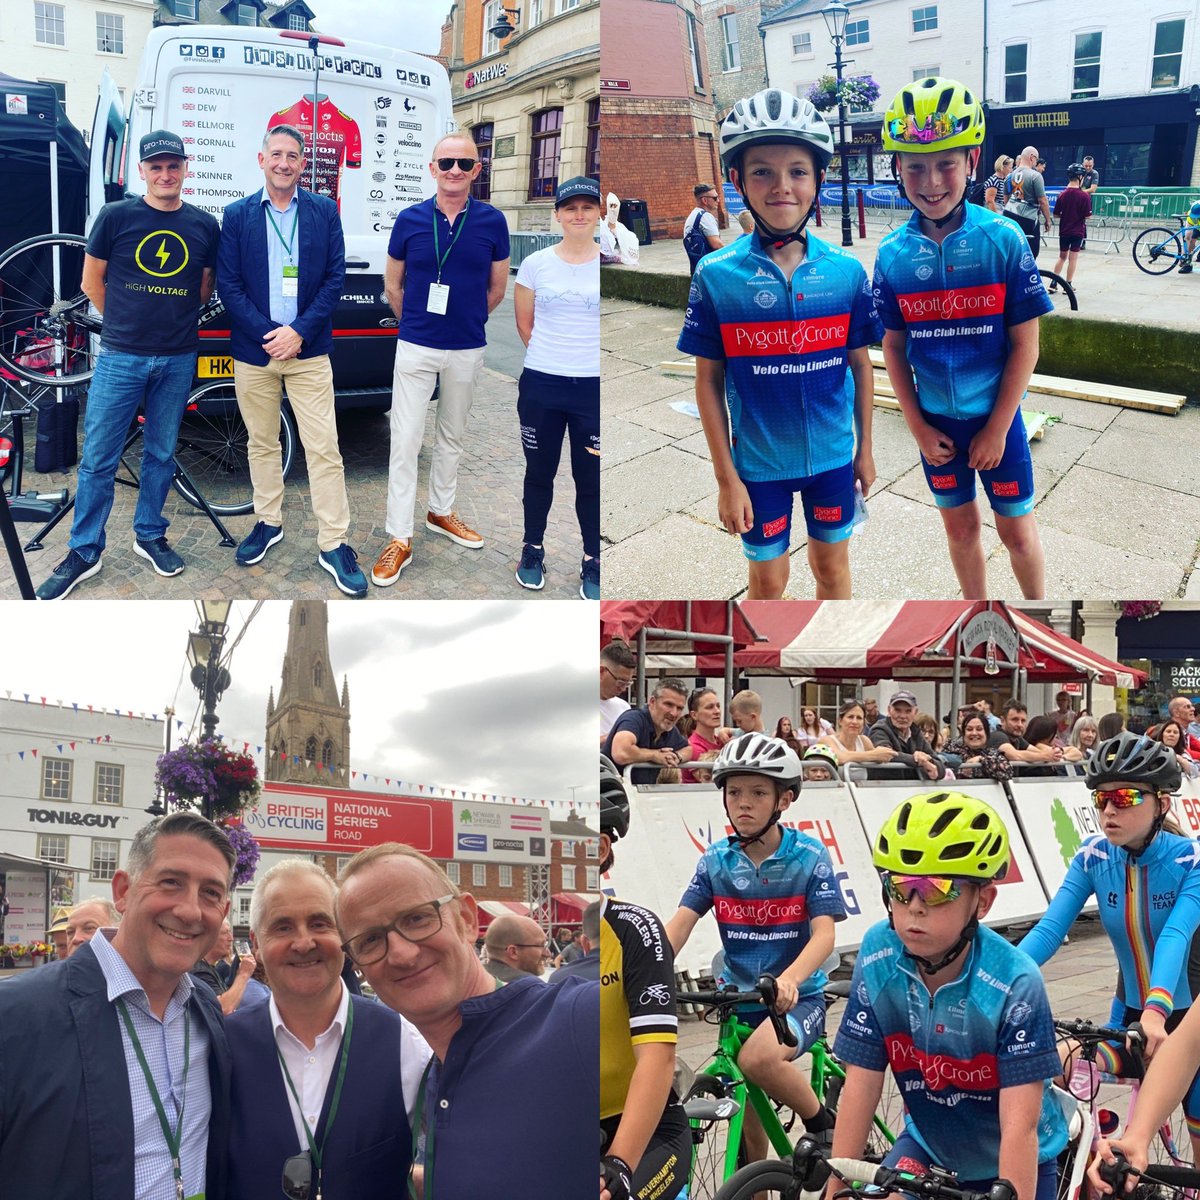 Great evening at the @NewarkCrit this evening as a guest of @BritishCycling good to see @HemswellCourt sponsored @FinishLineRT and fellow @TeamLincs members @GleedsGlobal @RizkMcCayTribe